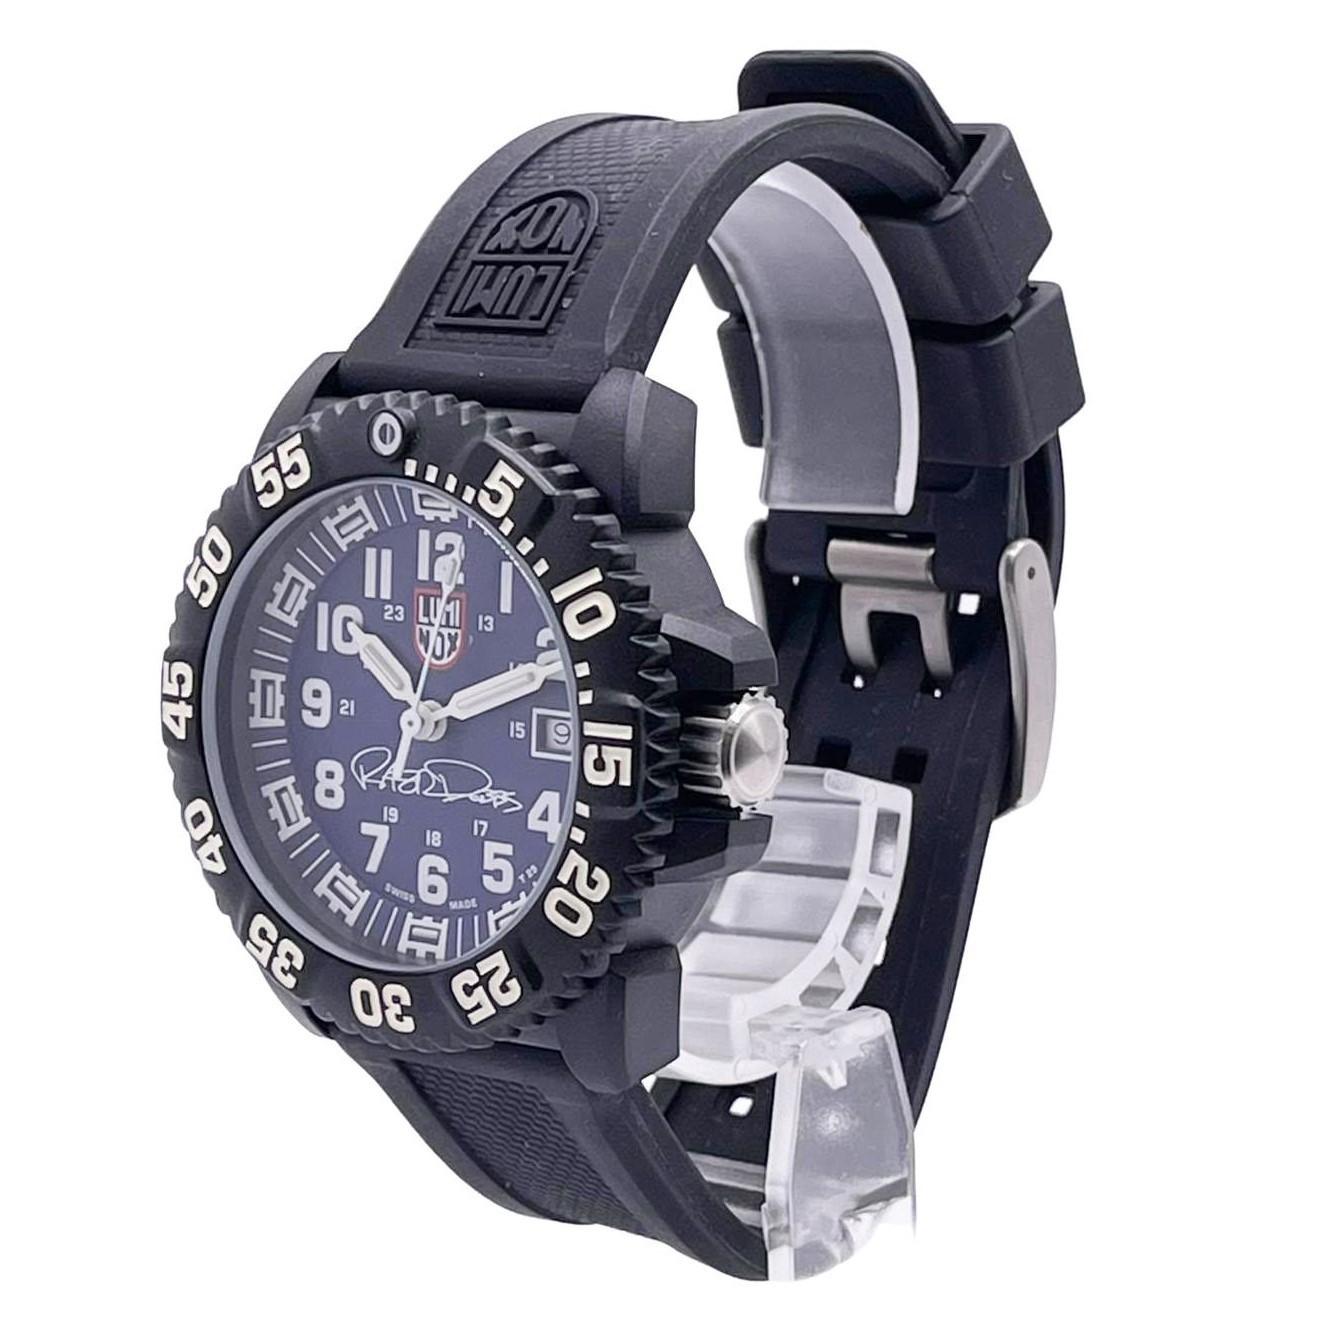 Display Model Luminox Razor Dobbs Signature Men's WatchXS.3054.RD. The watch may have minor marks on the case or case back due to storing. This Timepiece is powered by Quartz (battery) movement with features: Carbon case with rubber strap and